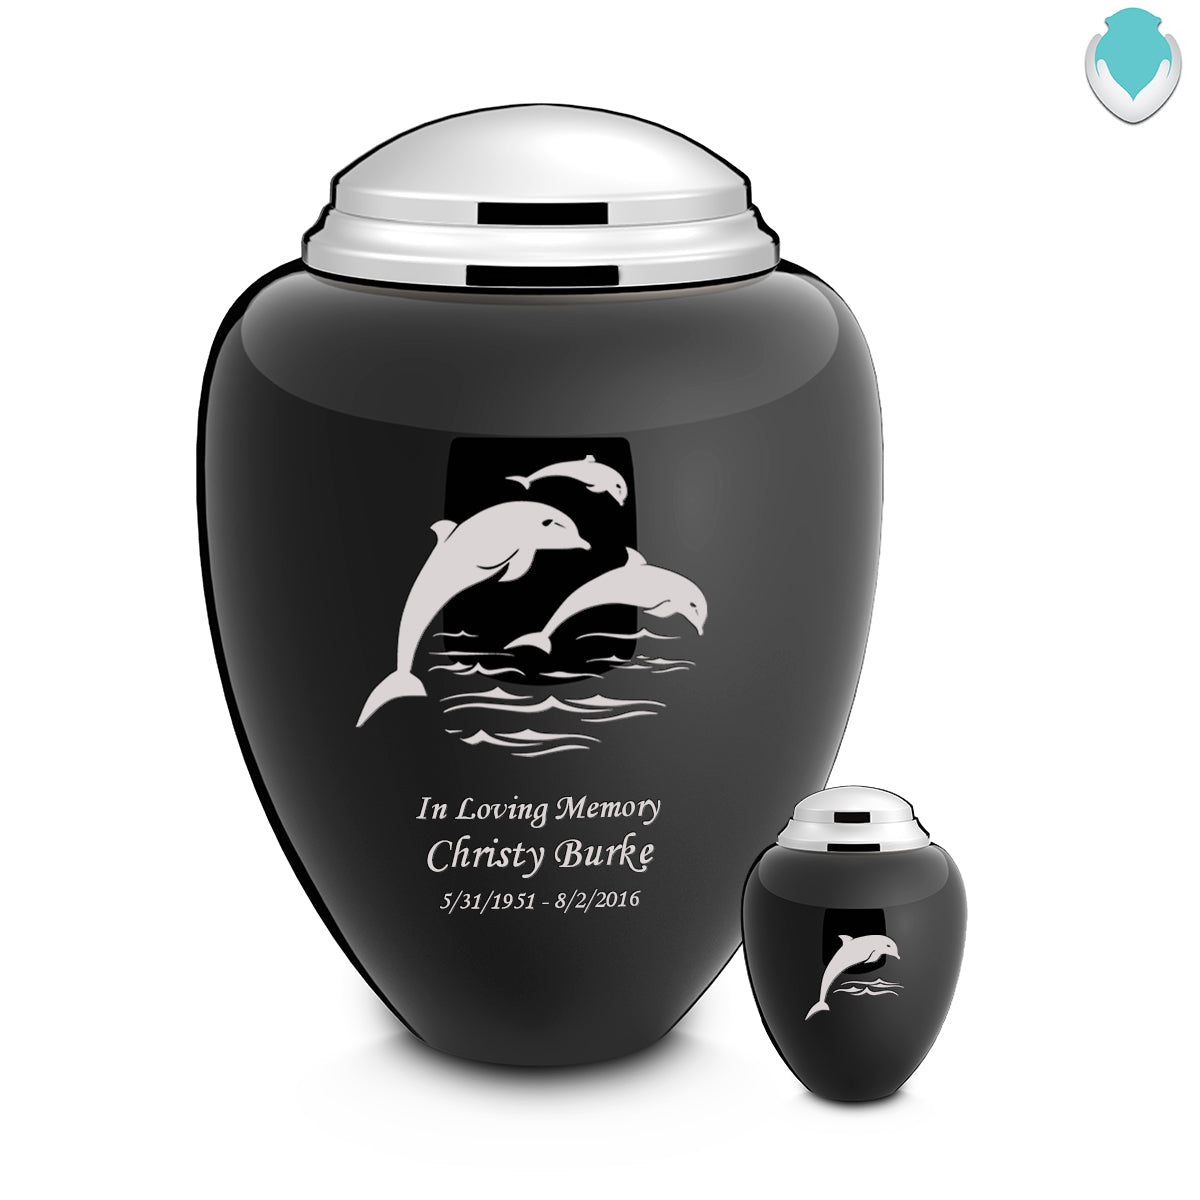 Shark Adult Cremation Urn Personalization Available Tribute, 52% OFF